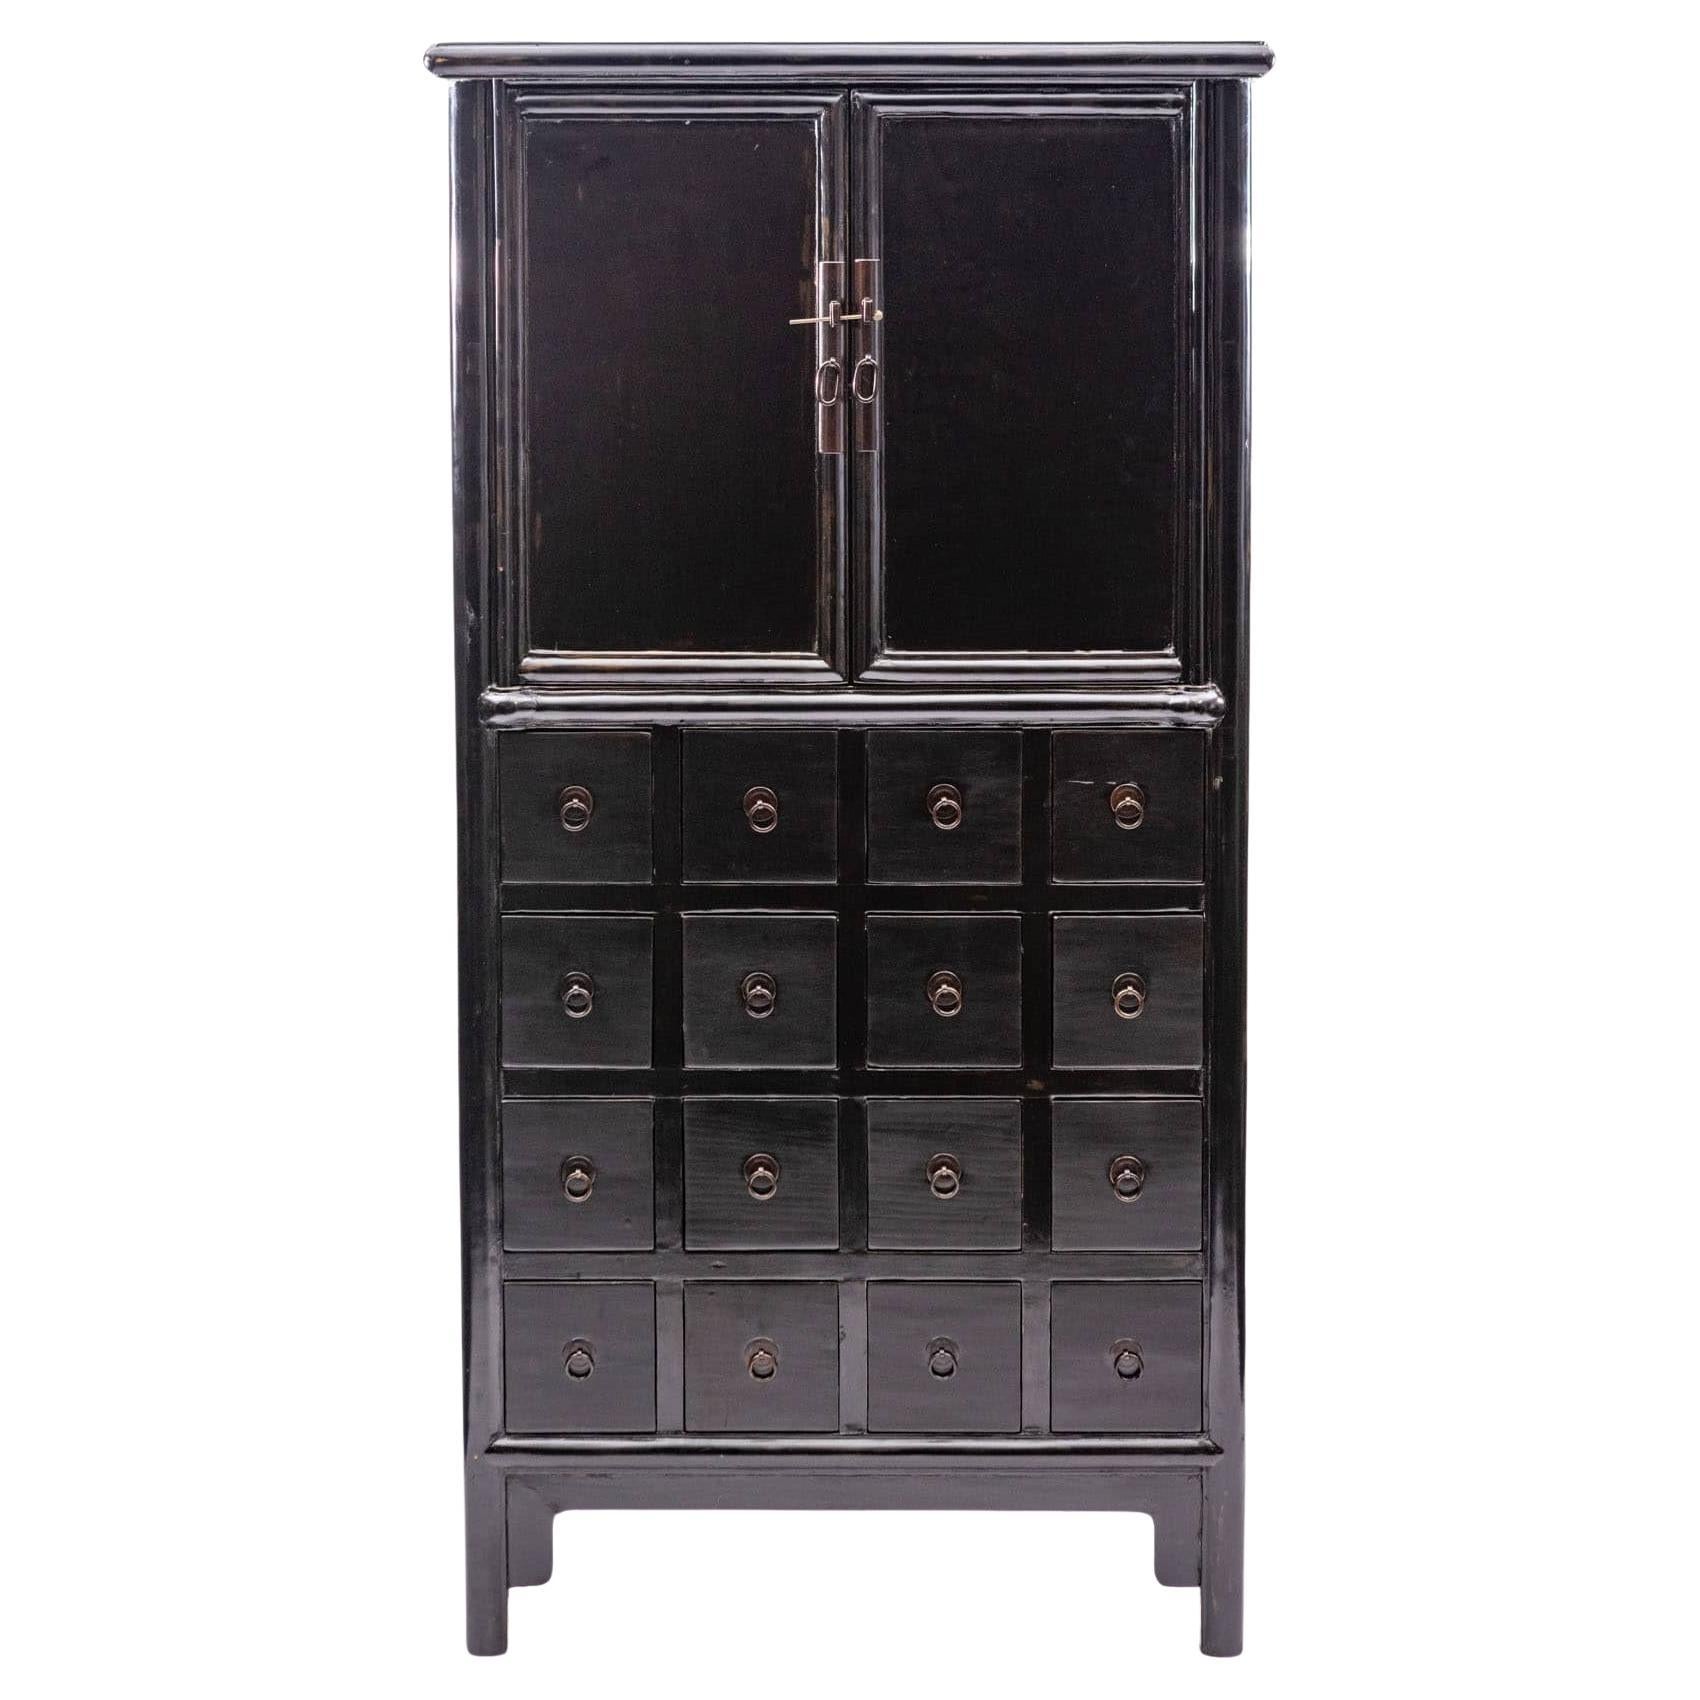 Antique Chinese Pharmacy Cabinet, Black Lacquer, c 1860-1880